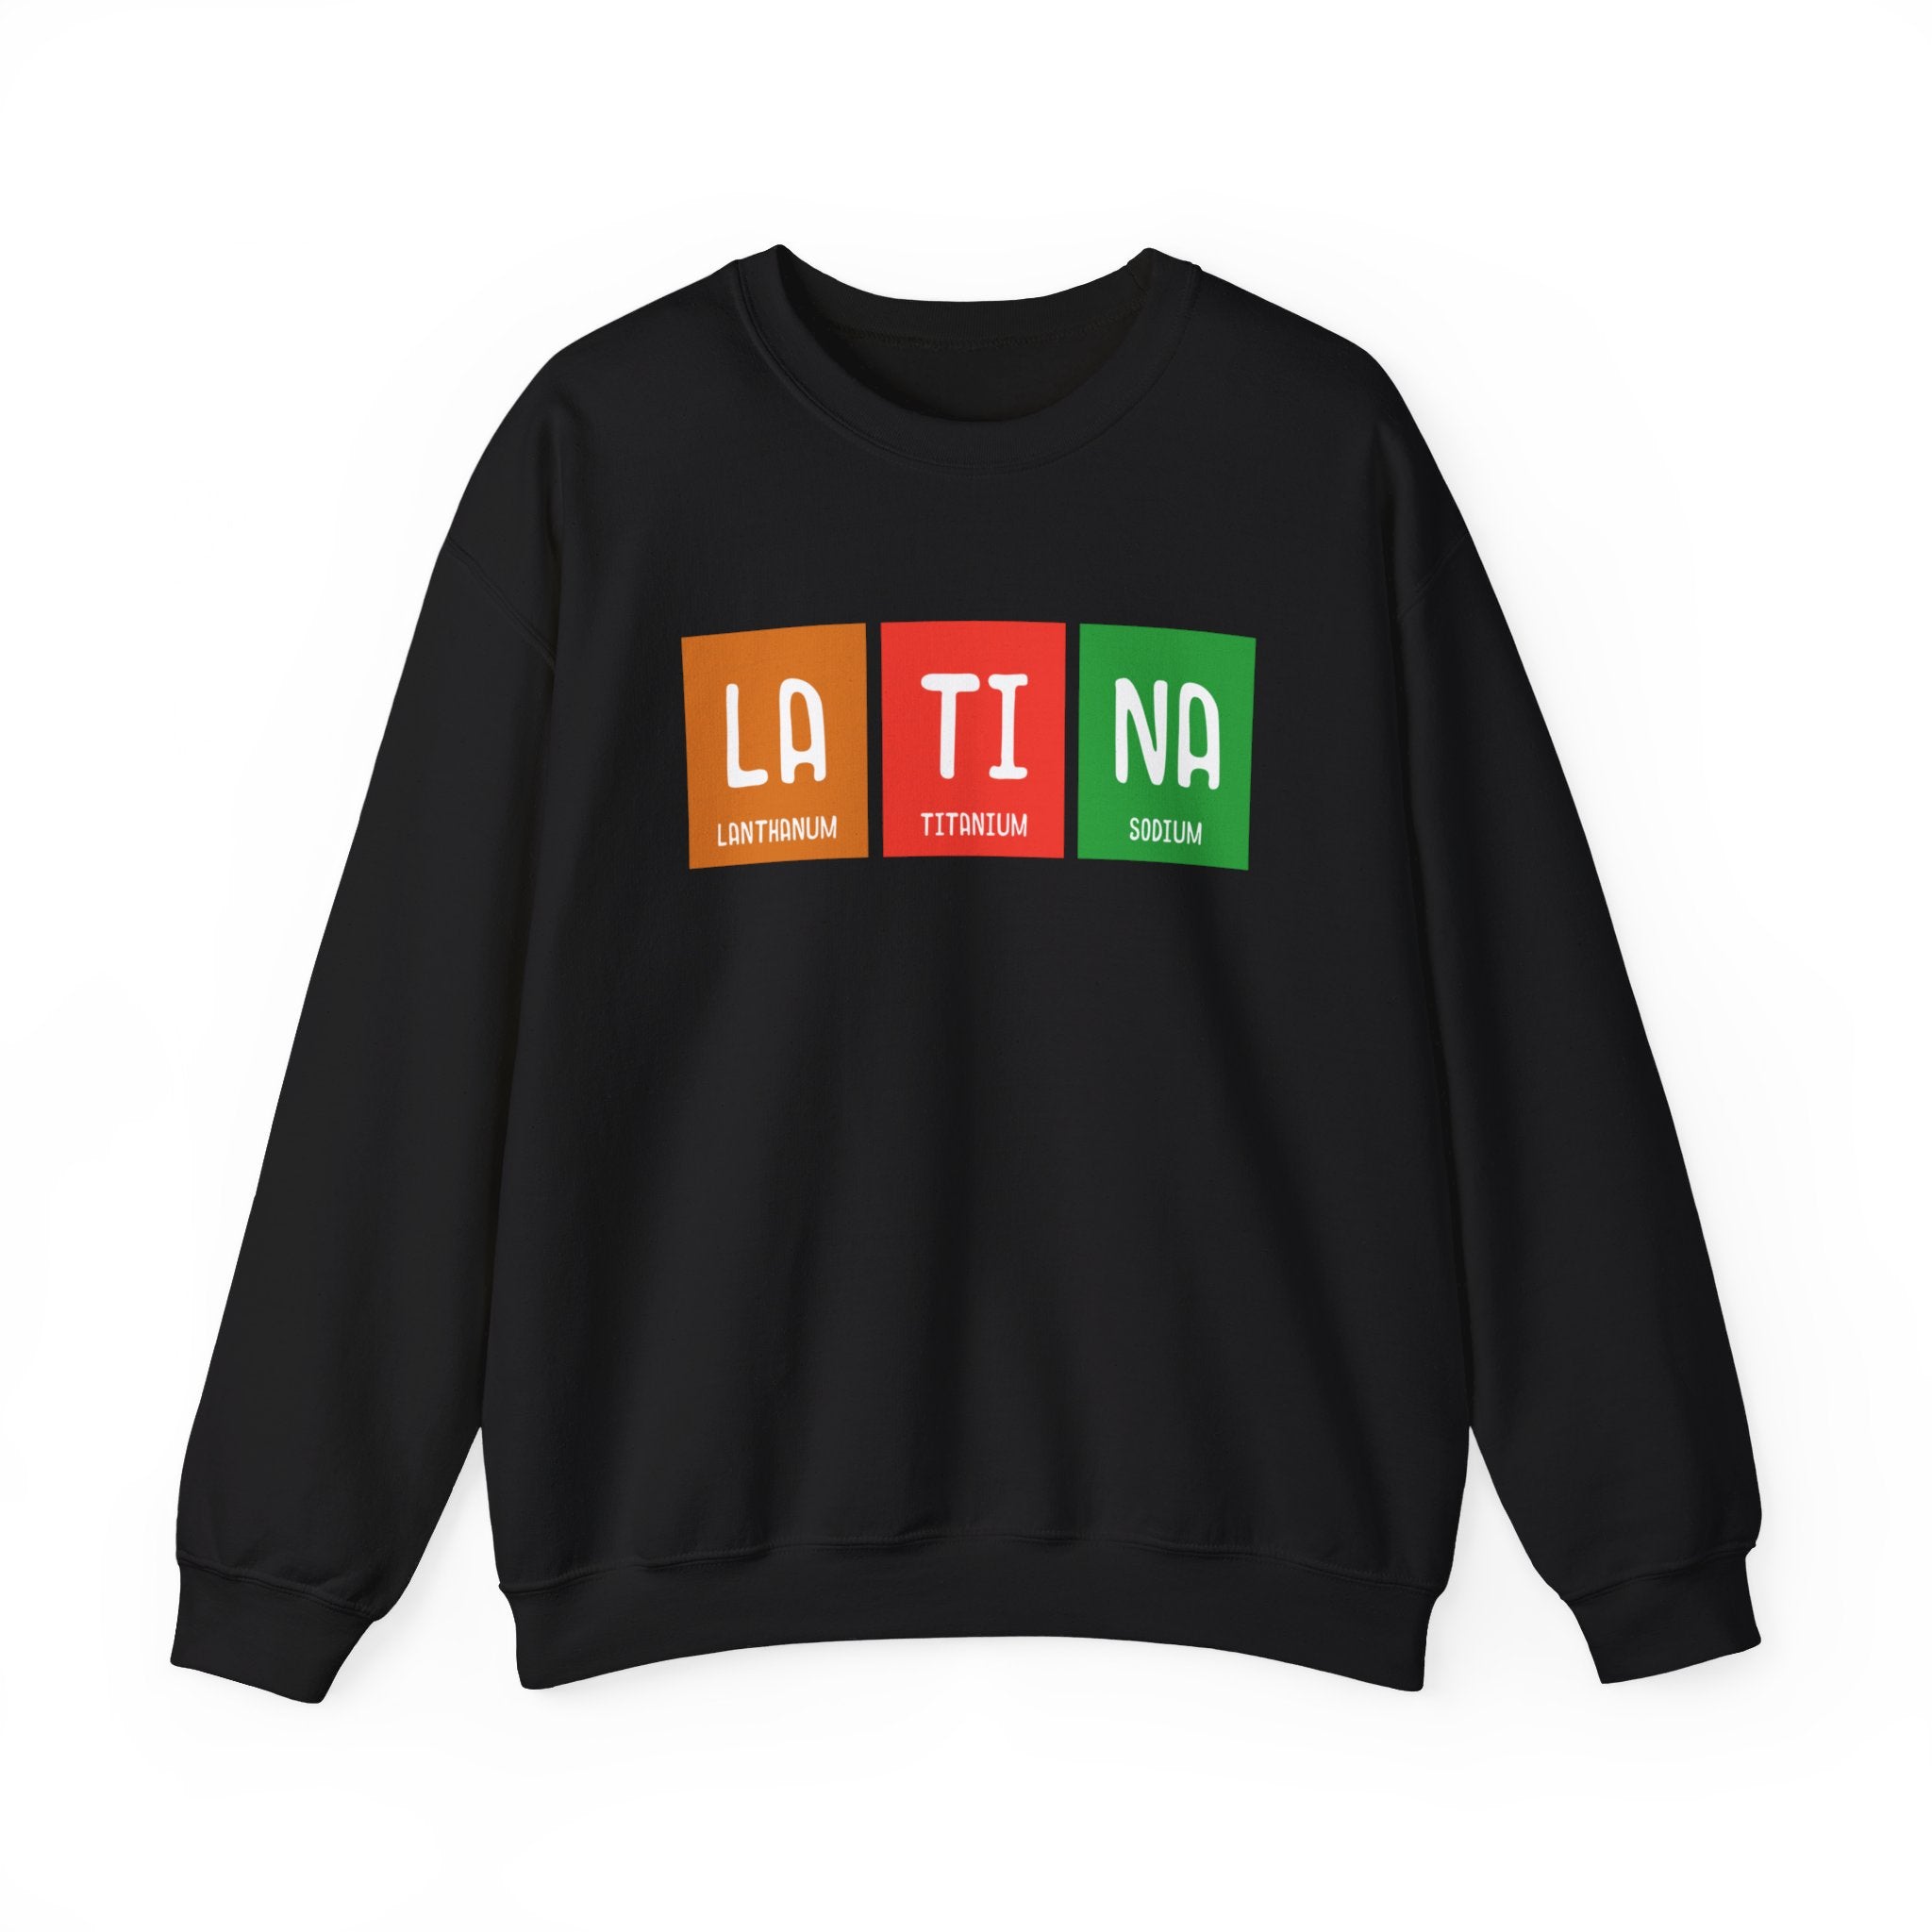 Cozy black LA-TI-NA - Sweatshirt with colorful text "LA TI NA" printed on the front, styled as chemical element symbols for Lanthanum, Titanium, and Sodium—a true winter essential.